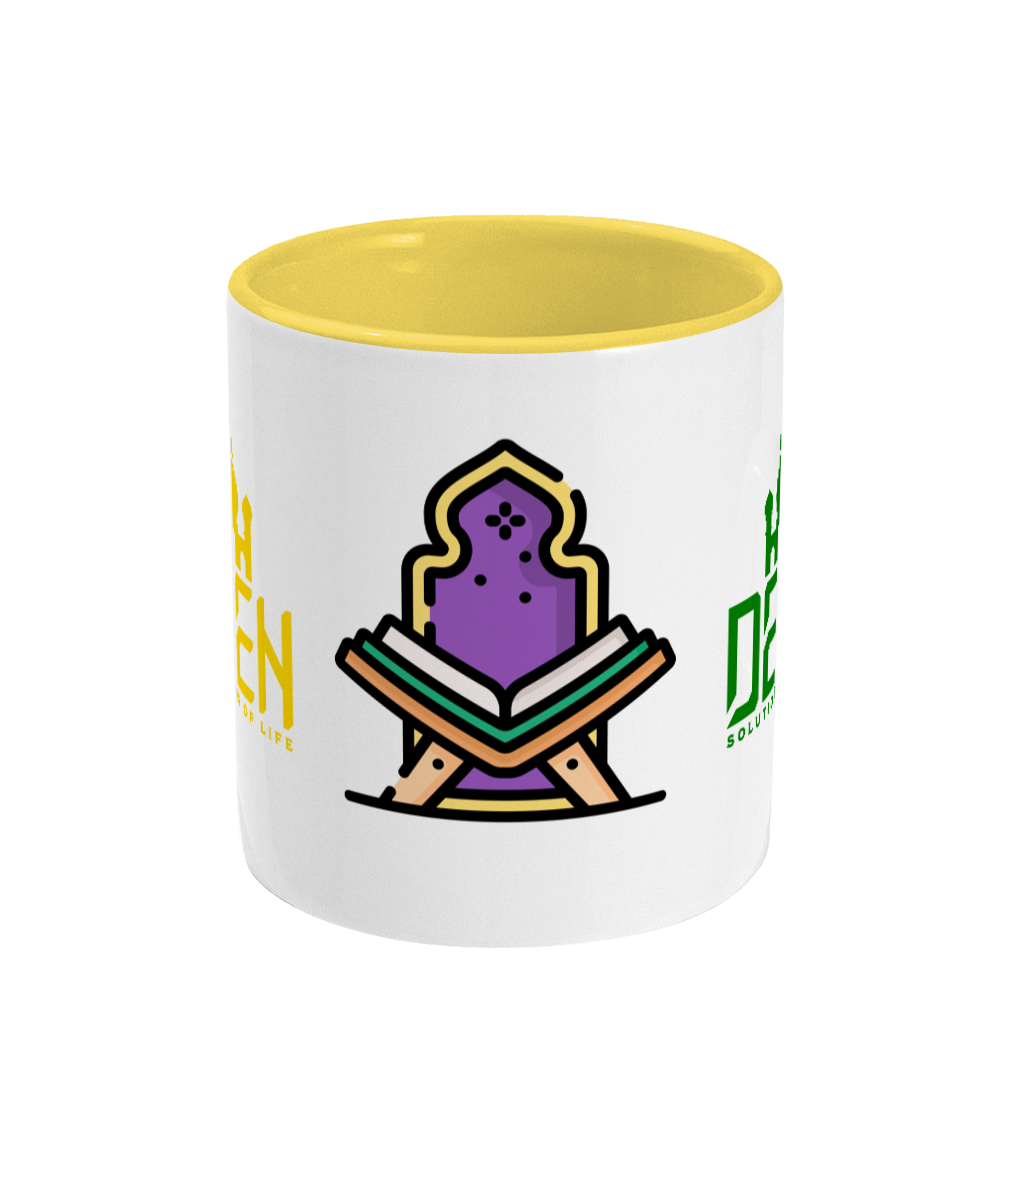 DEEN Solutions of life Two Toned Mug